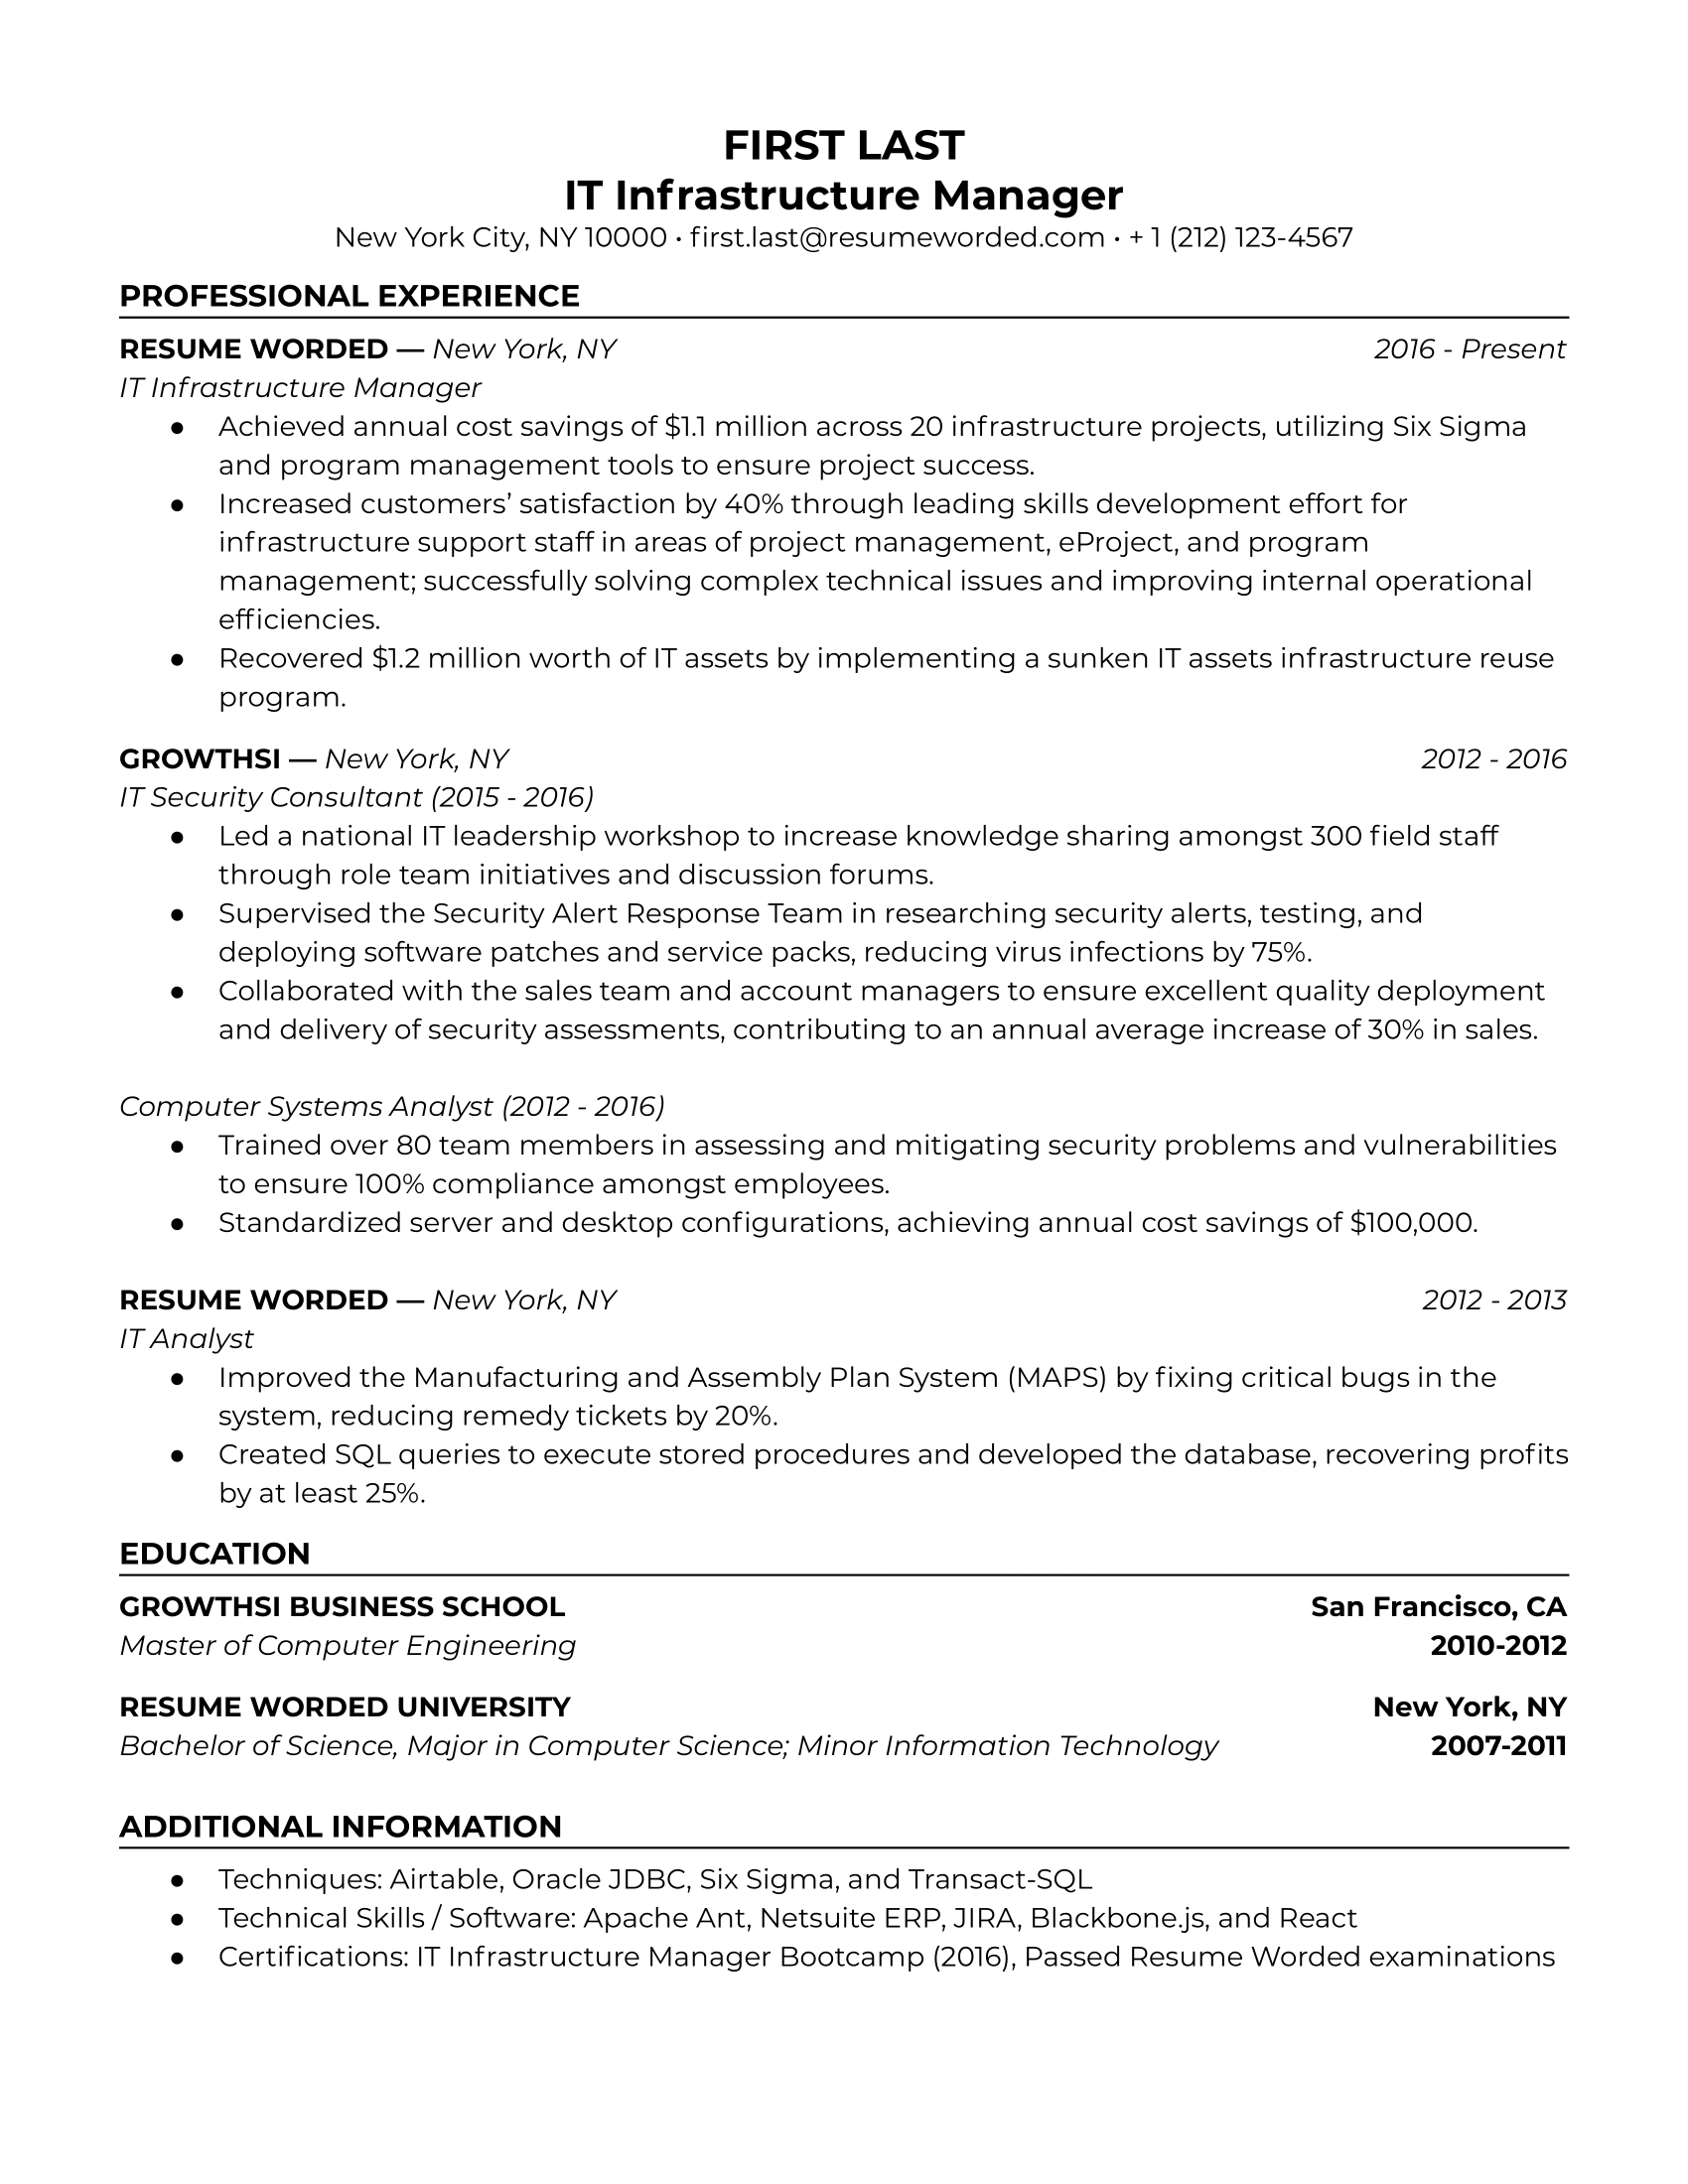 IT Infrastructure Manager Resume Sample